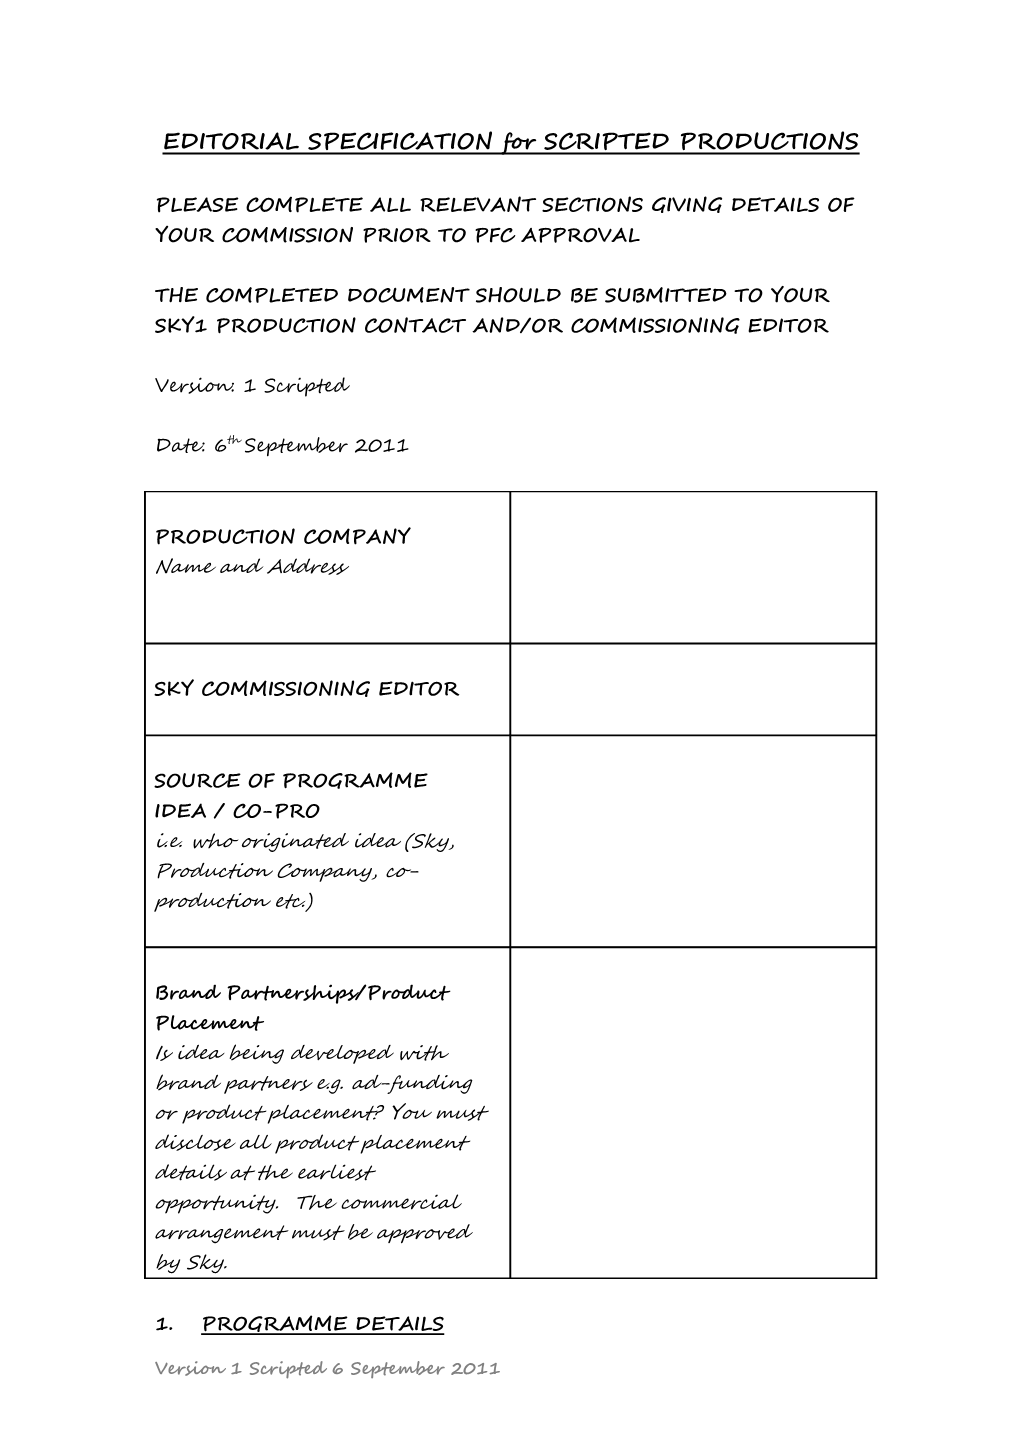 Commissioning Editorial Specification